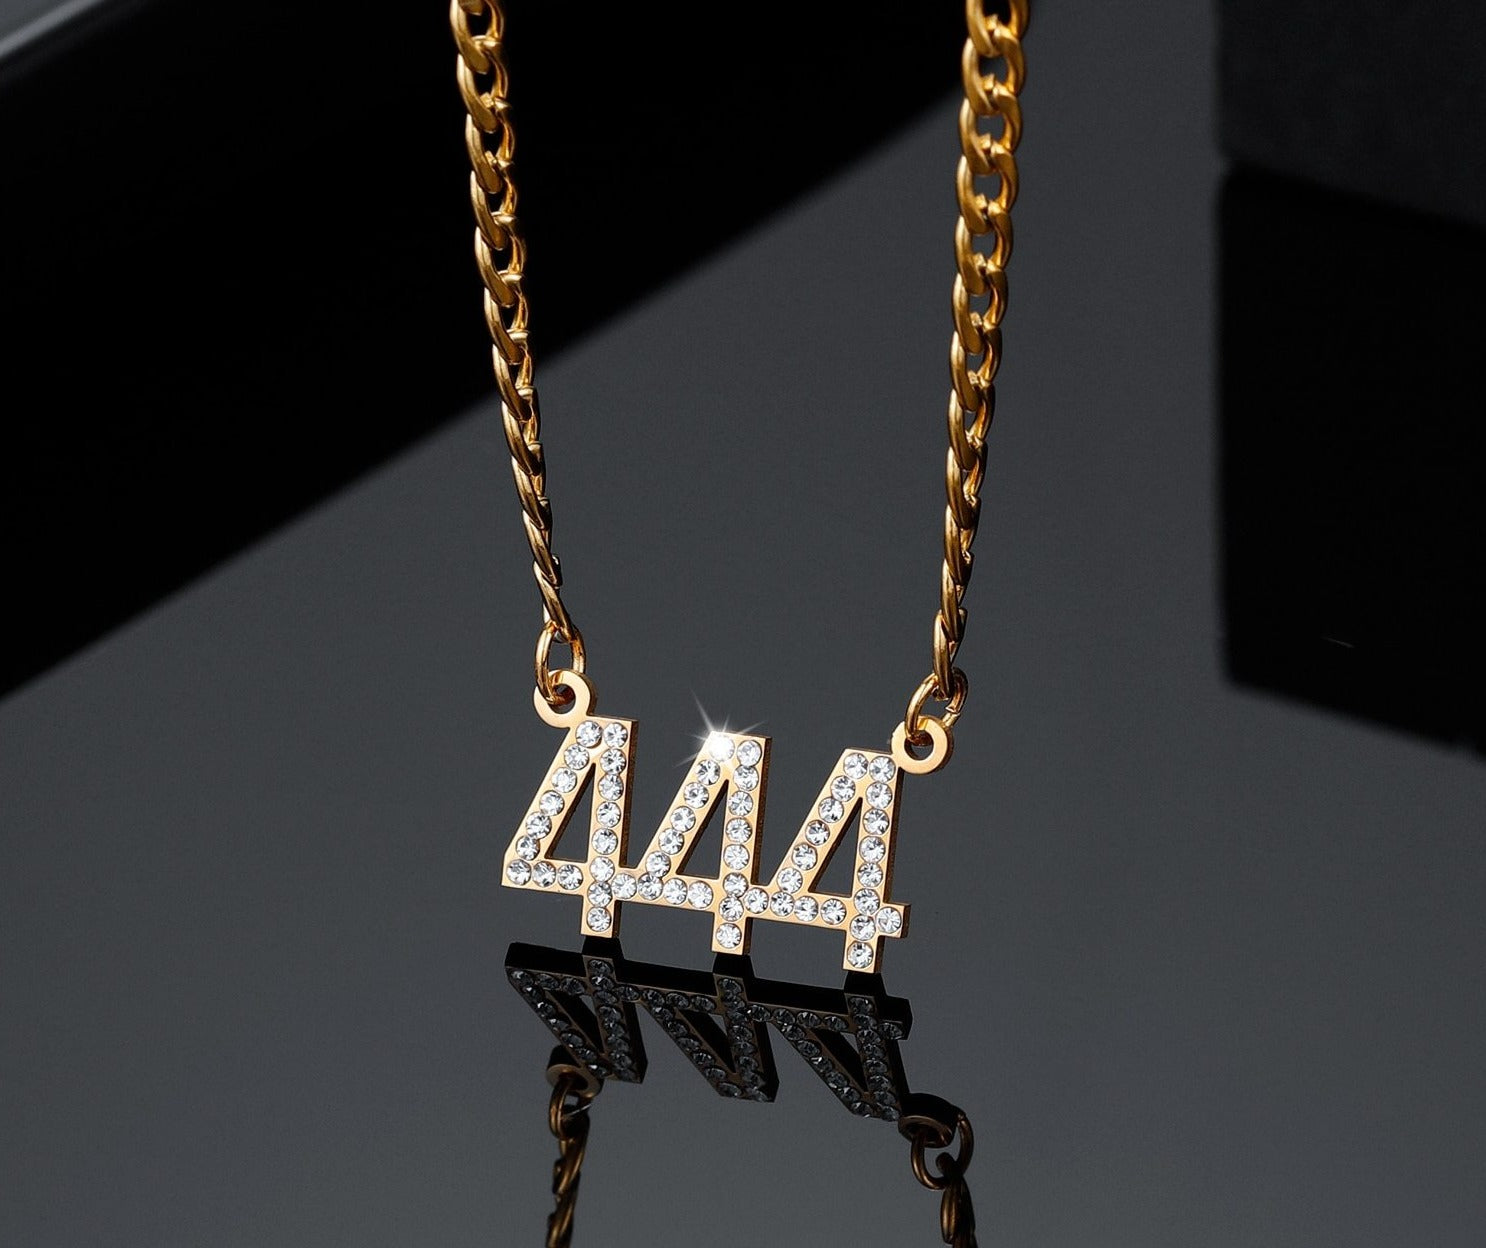 Customized Angel Number Necklace